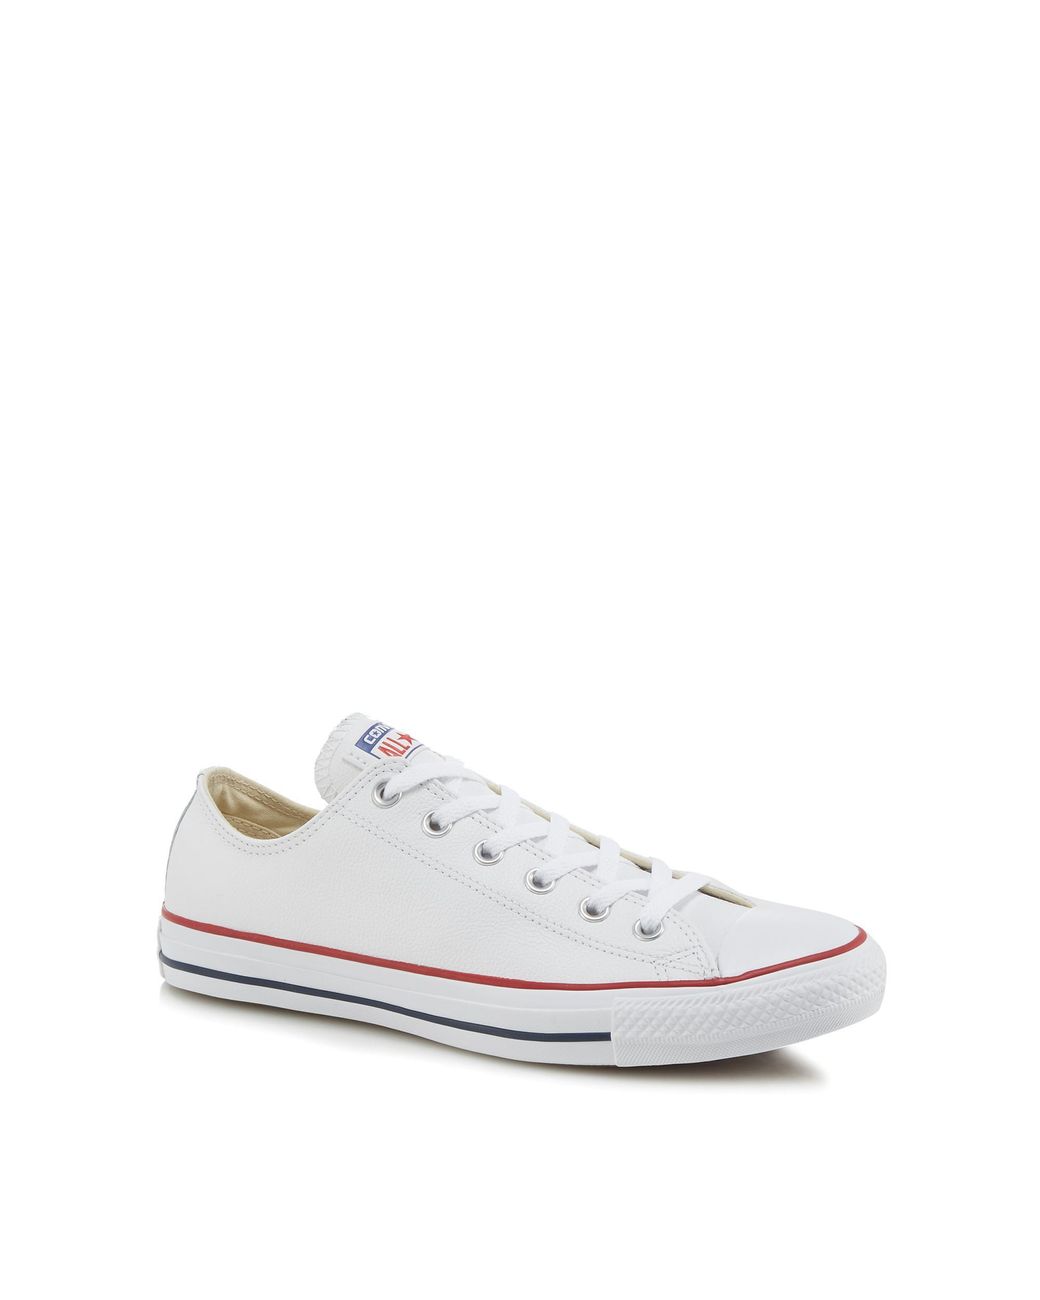 White Leather Converse Usc Best Sale - www.anythinginstainedglass.com  1693379159